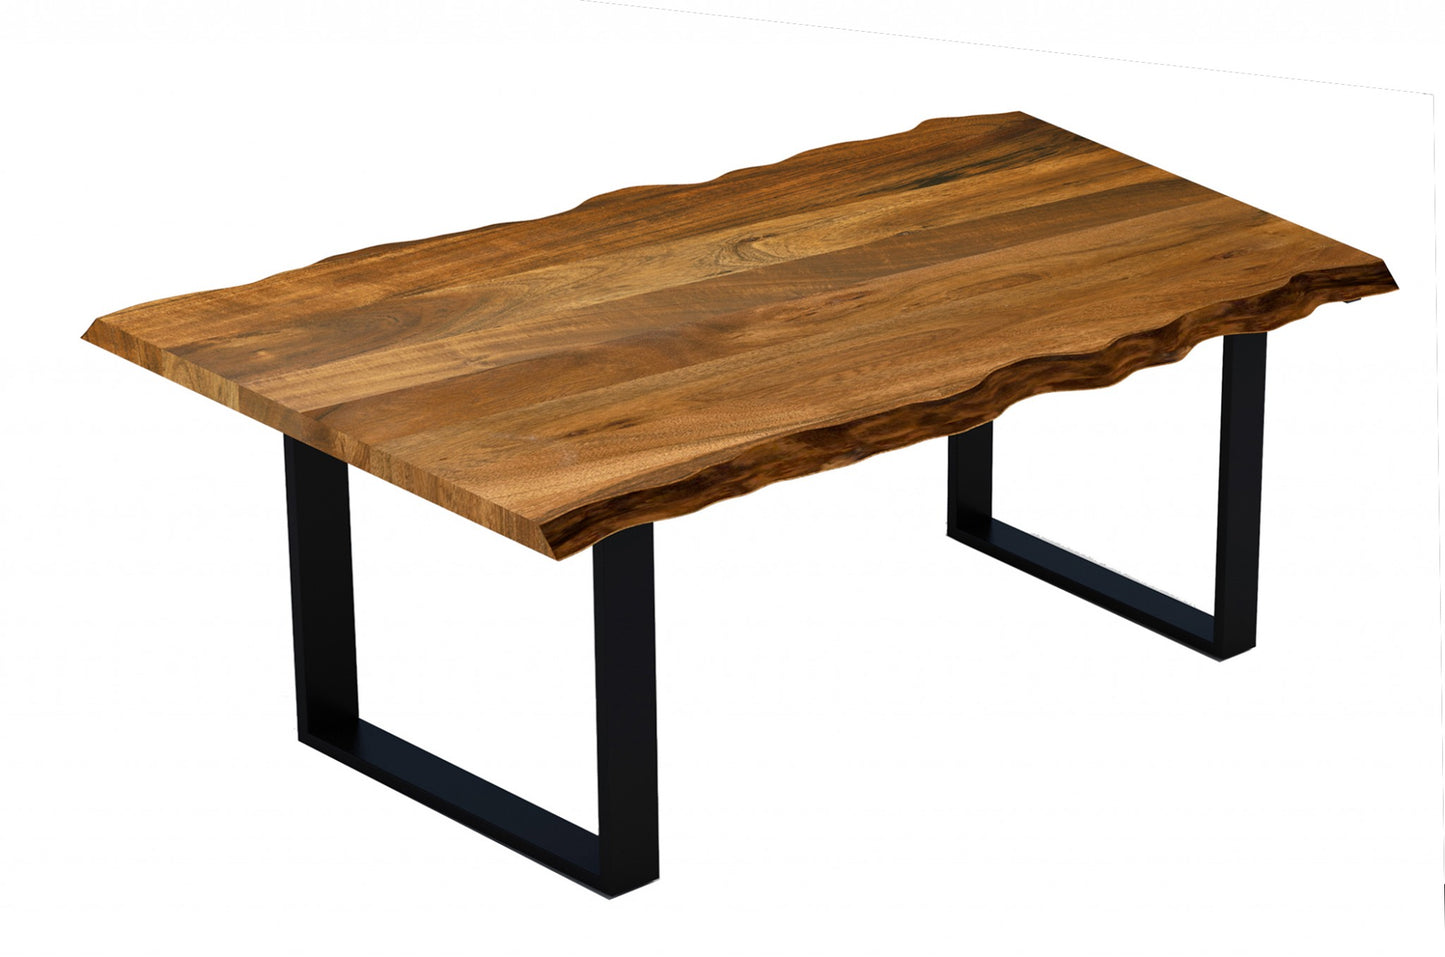 63" Brown And Black Solid Wood Dining Table